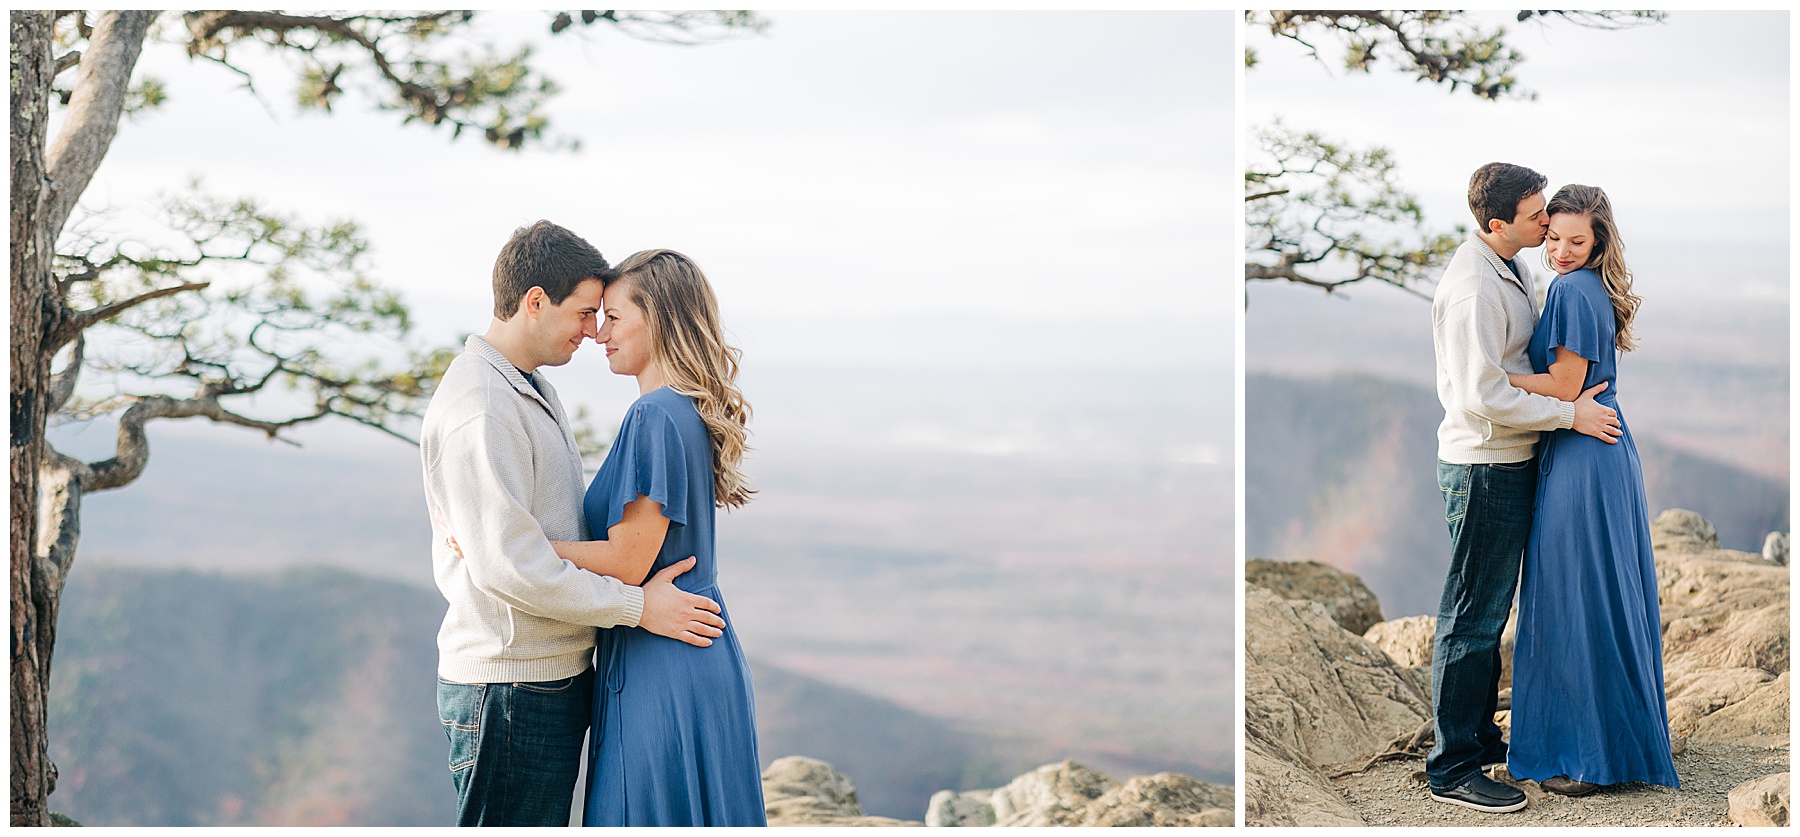 Ravens Roost Engagement Session by Virginia Wedding Company 